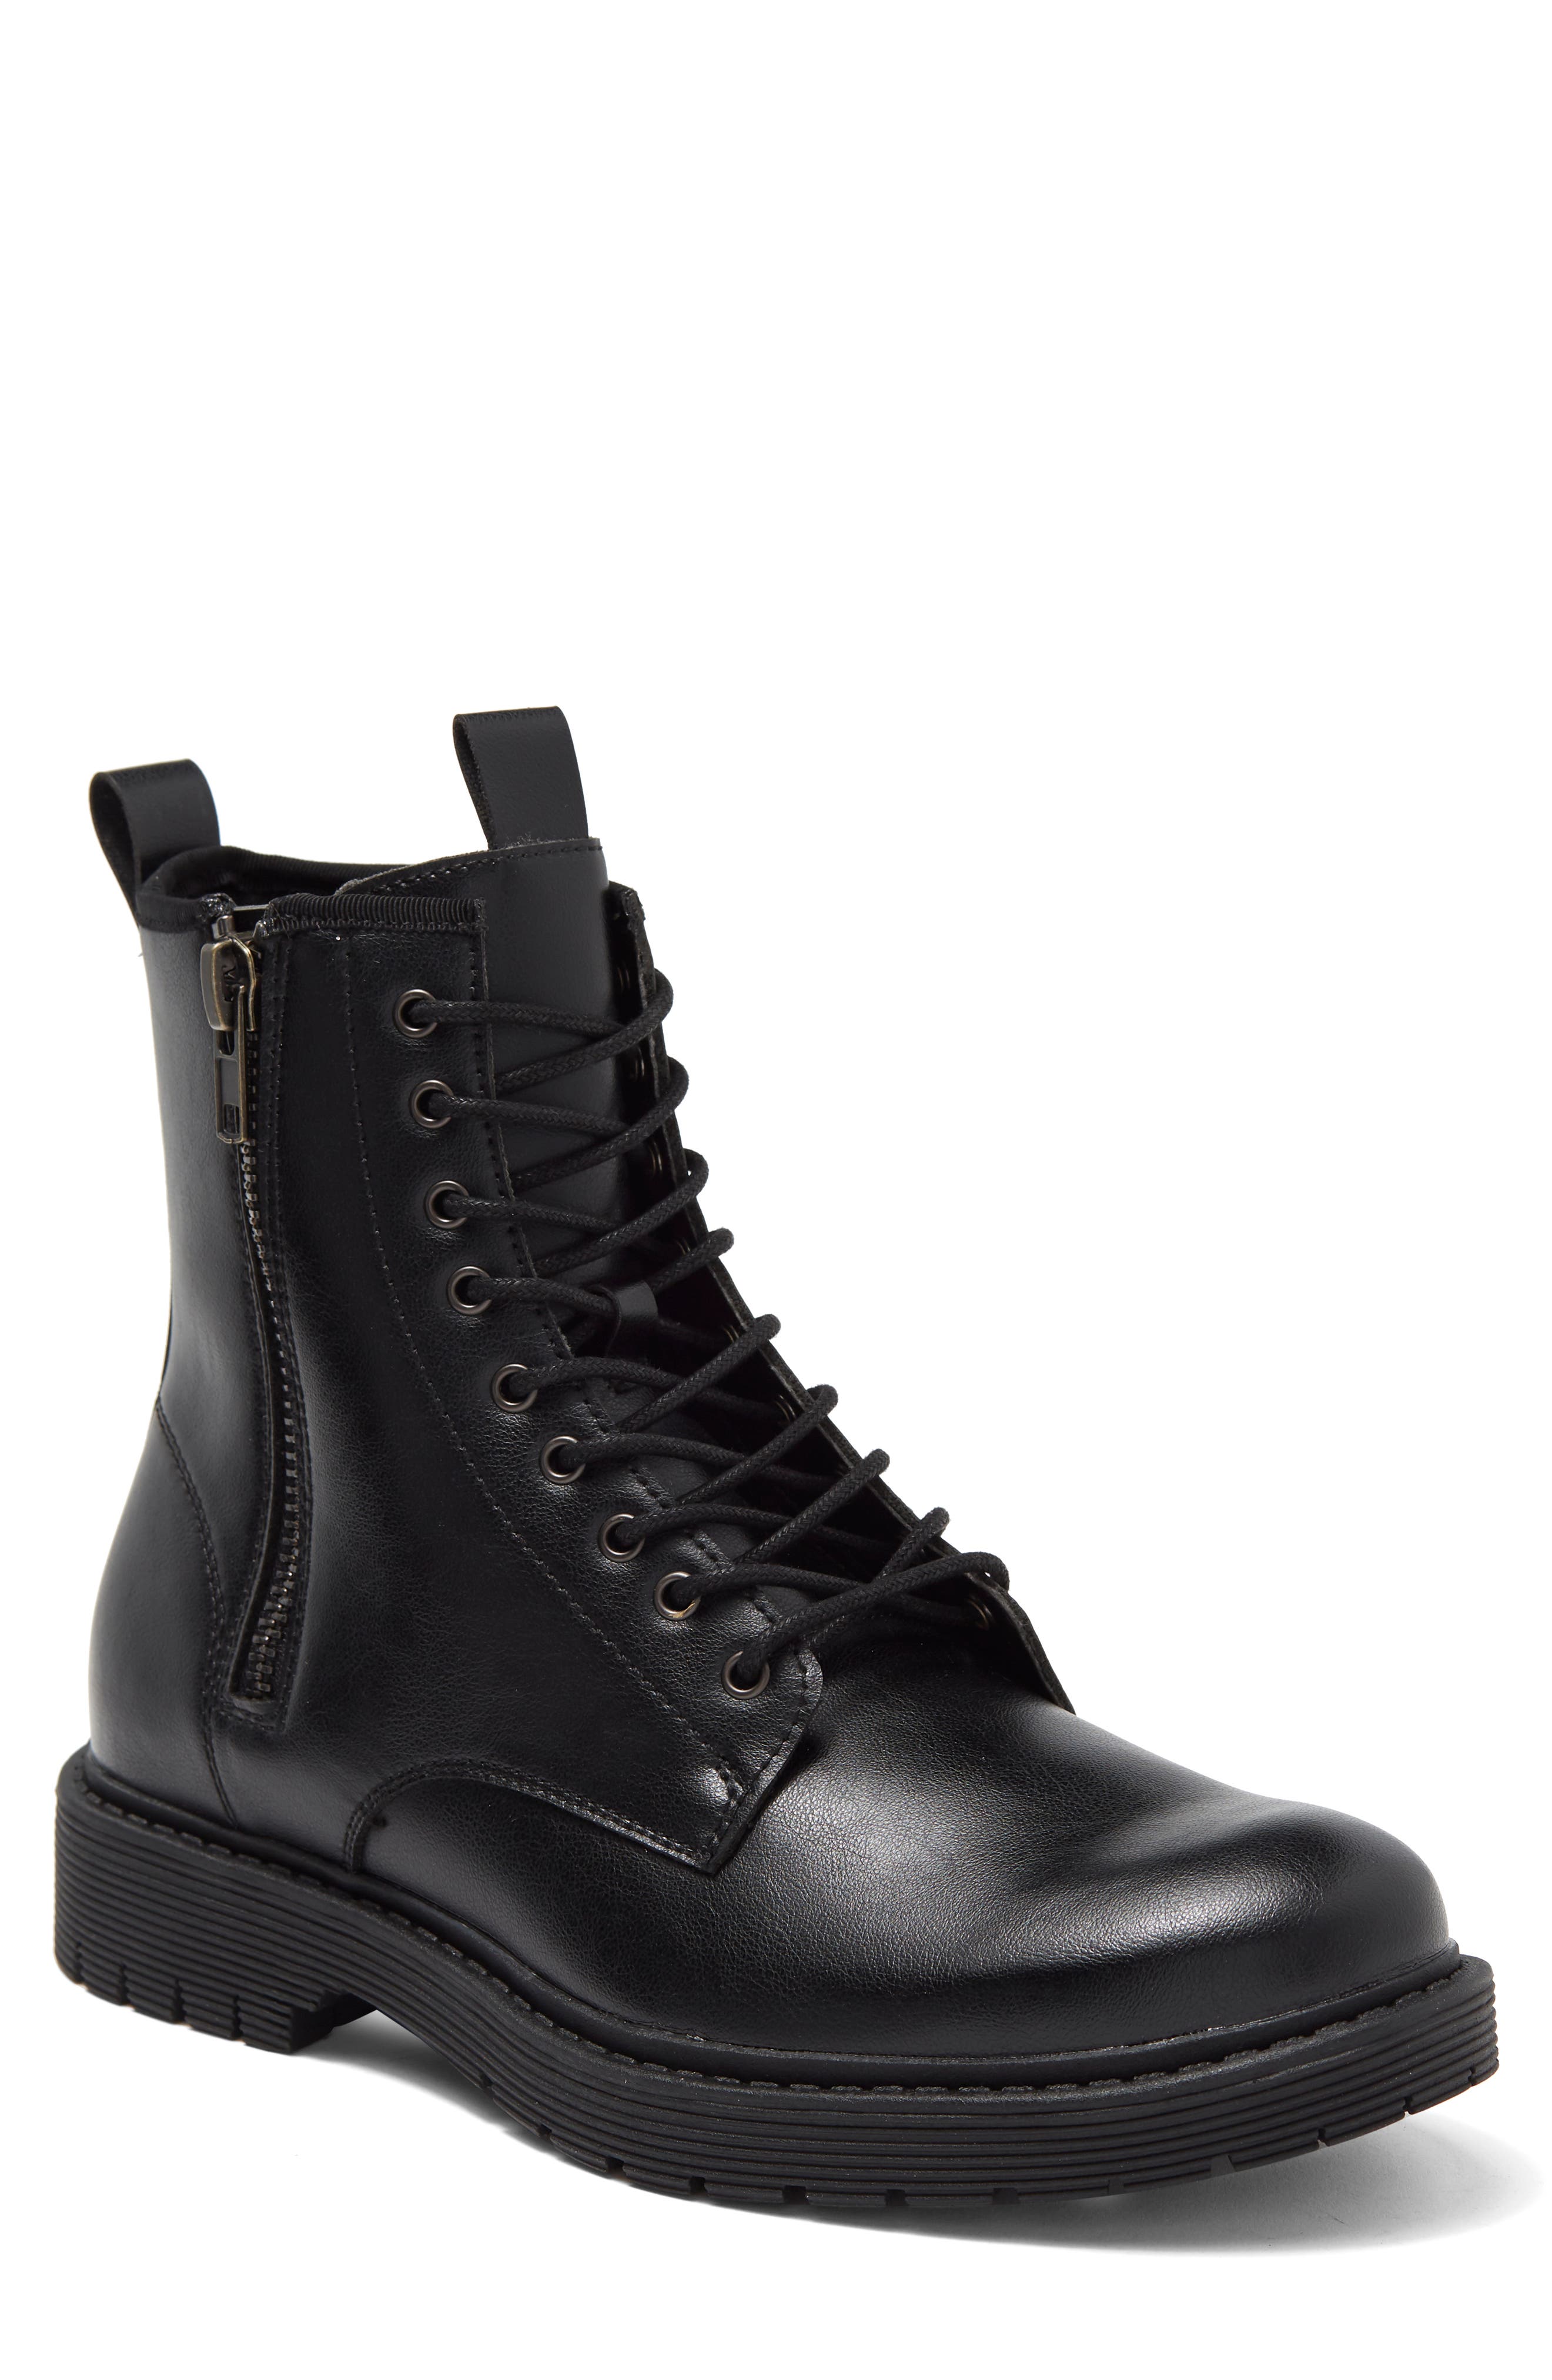 MENS TRUKA 01639 BLACK LEATHER LACE UP CASUAL EVERYDAY COMBAT BOOTS 